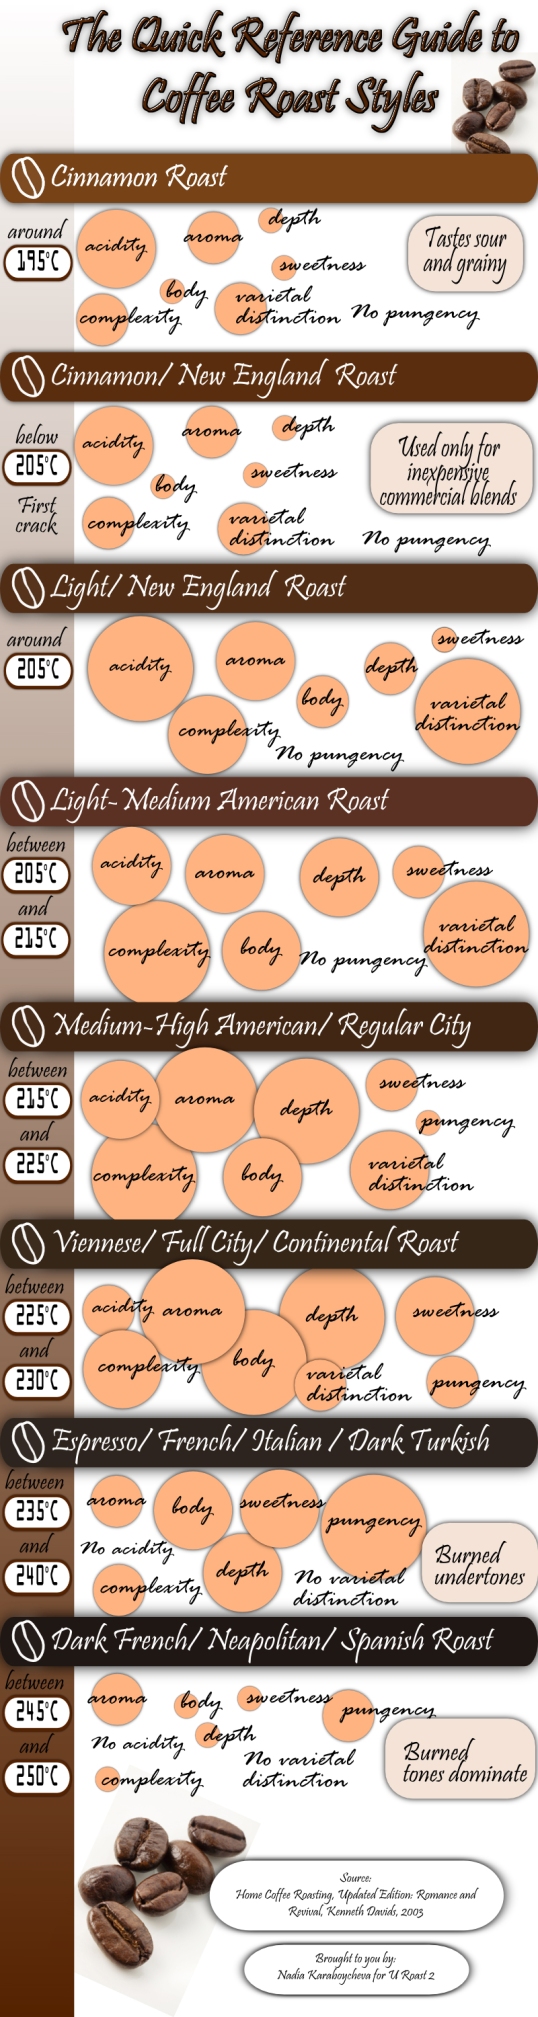 The Quick Reference Guide to Coffee Roast Styles Infographic